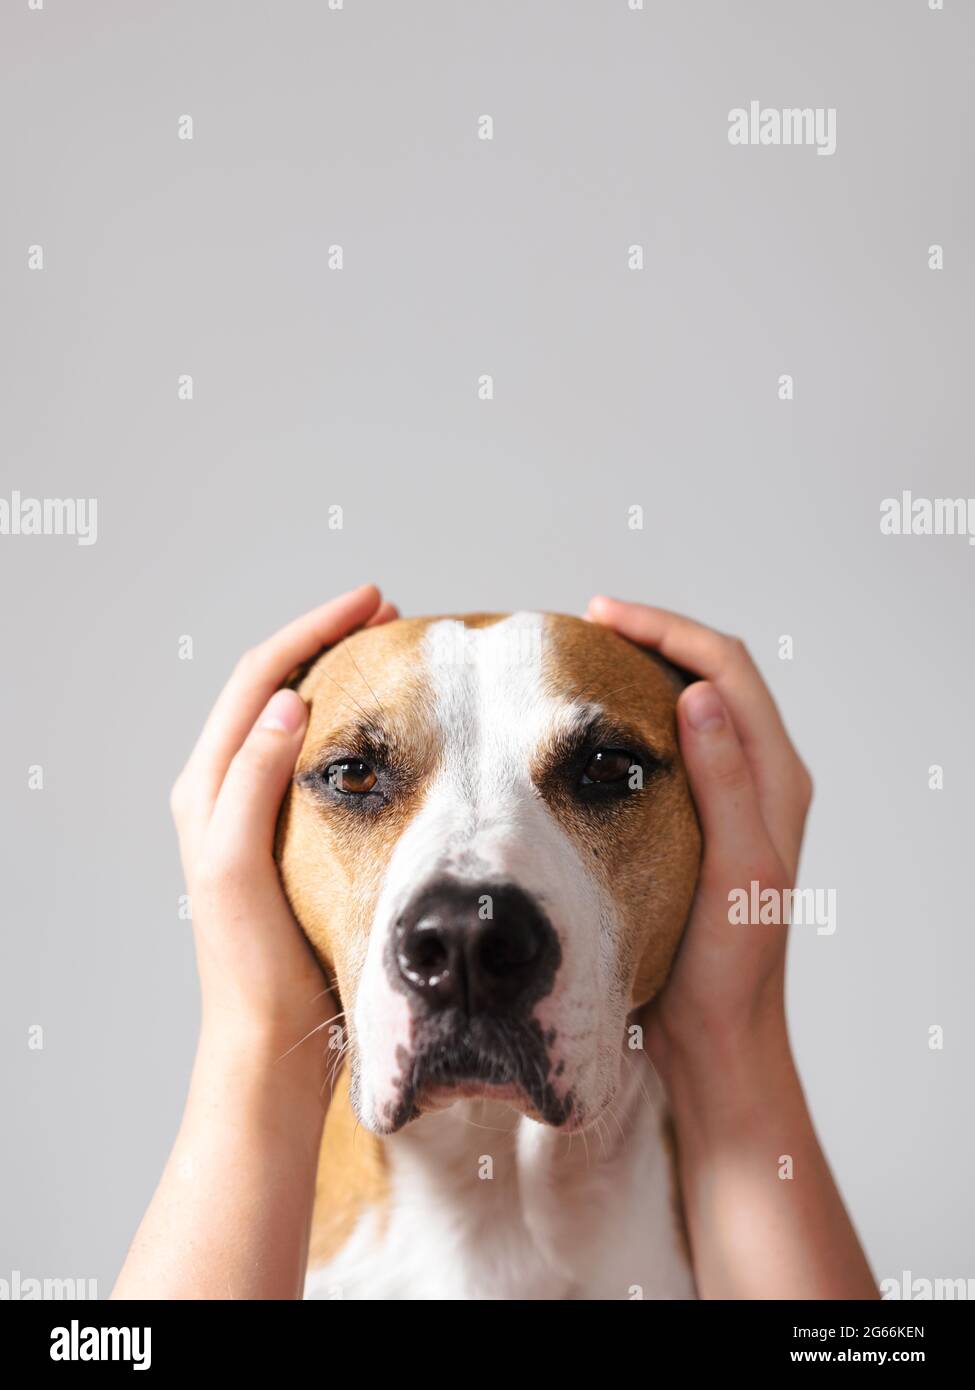 Portrait of a dog with ears covered up with human hands. Scared, frightened pets on holidays and July 4th Stock Photo